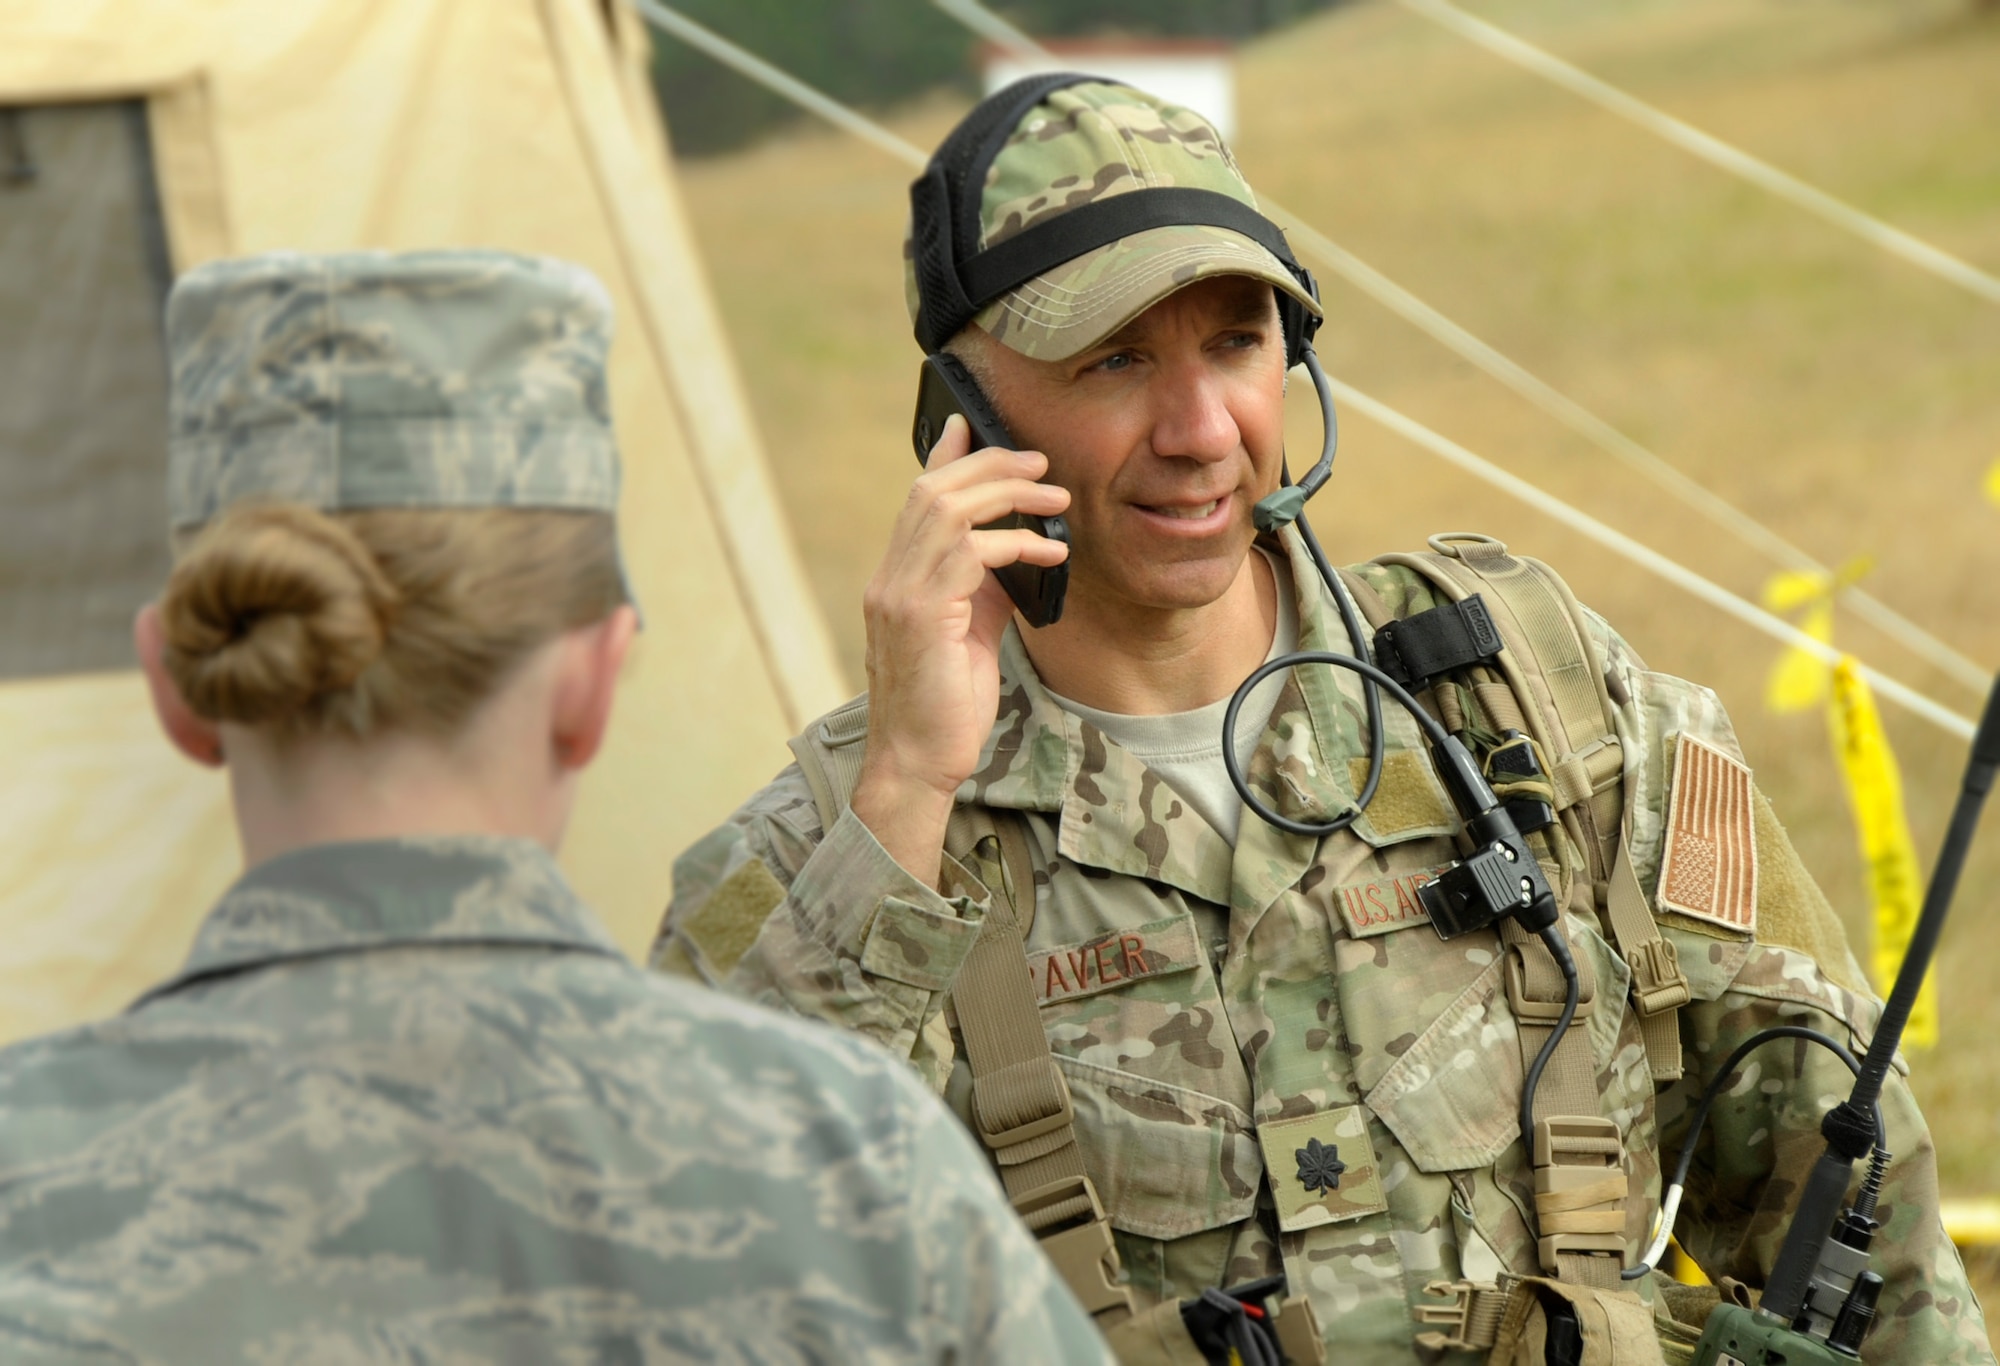 Lt. Col. John Graver, commander of the 304th Rescue Squadron in Portland, Ore., uses a cell phone and other communication equipment to help relay instructions to first responders and other participants taking part in the Pathfinder-Minutemen Exercise, Aug. 5, 2015 at Camp Rilea in Warrenton, Ore. The event is a joint multi-agency, multi-state disaster preparedness exercise based on response to a possible Cascadia Subduction Zone event. Officials believe the Northwest is overdue for a magnitude 7.0 or greater earthquake. (U.S. Air National Guard photo by Tech. Sgt. John Hughel, 142nd Fighter Wing Public Affairs/Released)